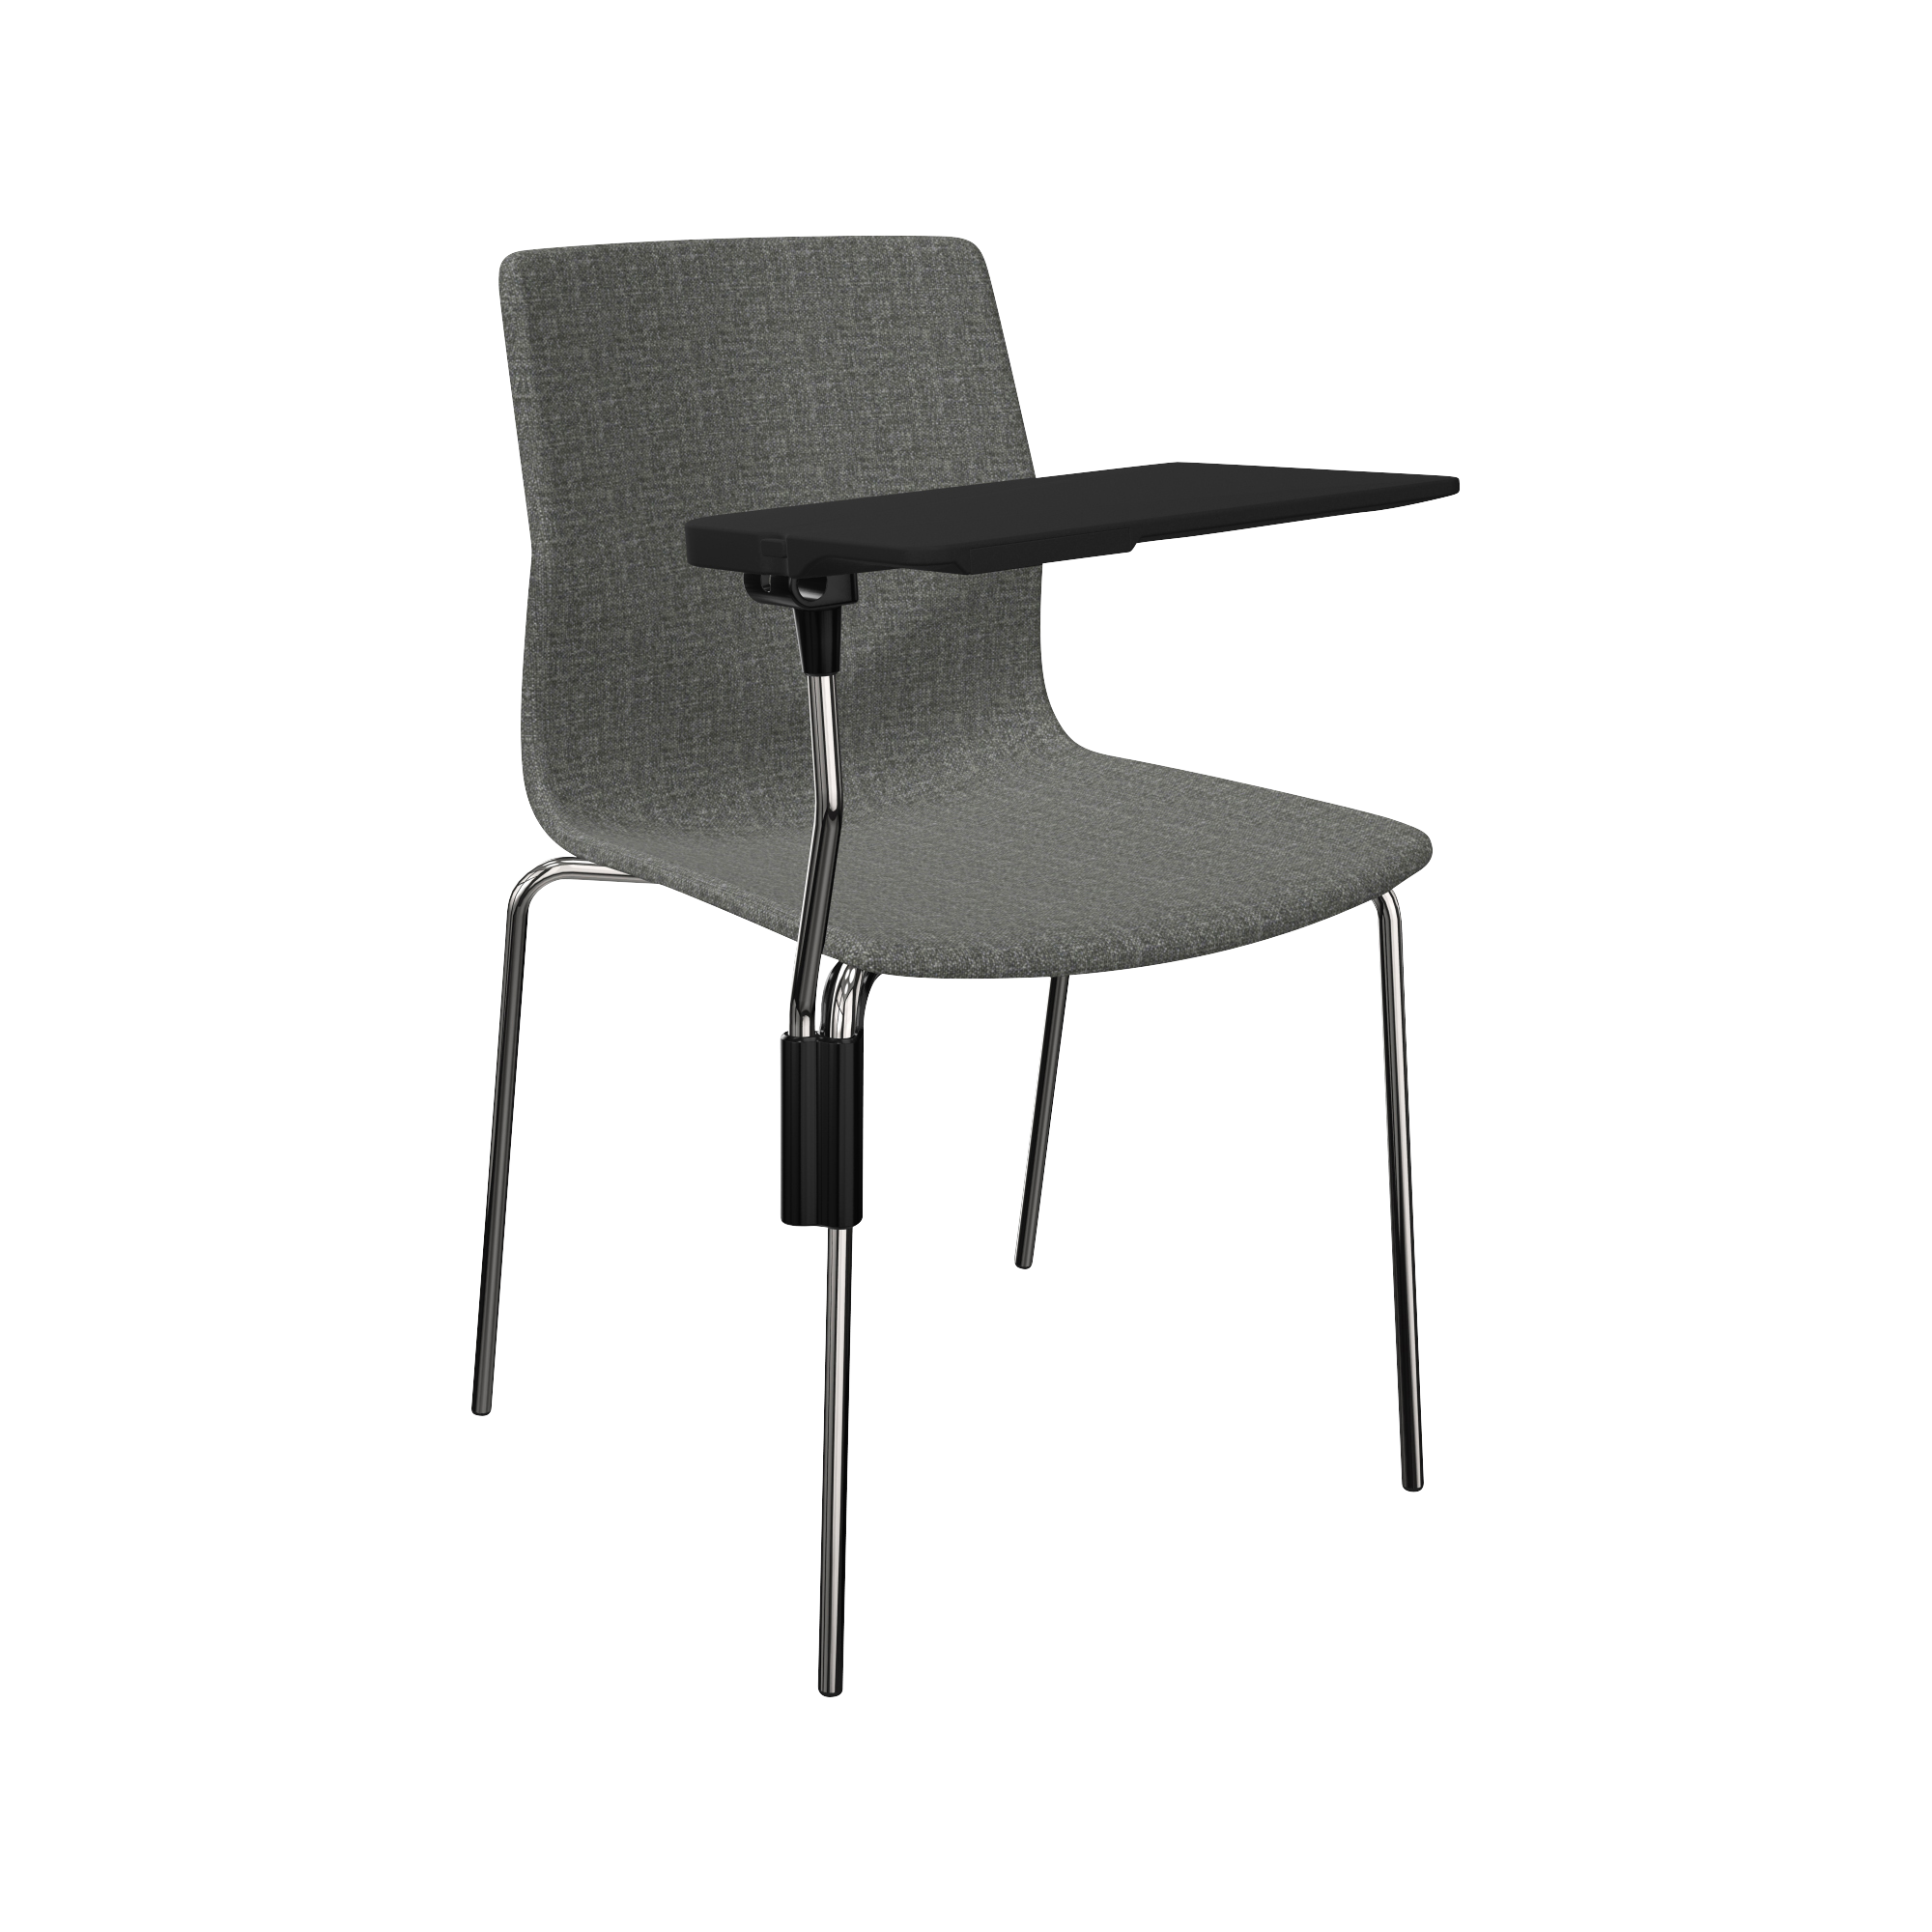 A grey chair with a laptop table on it